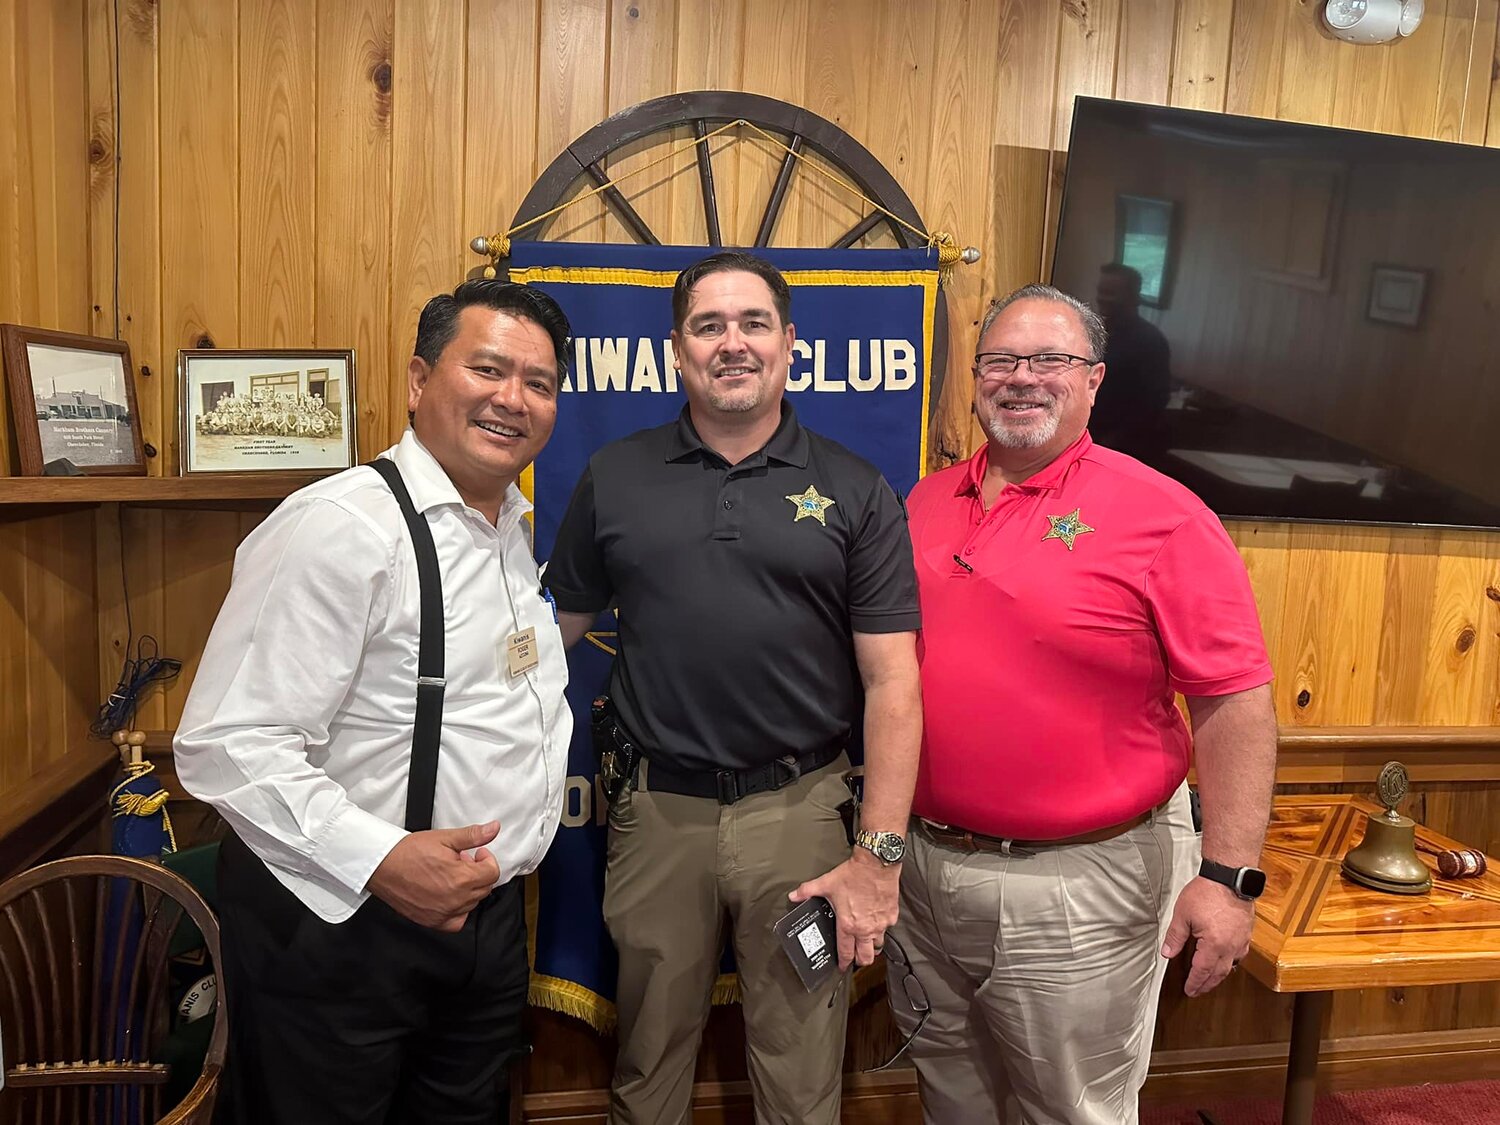 OKEECHOBEE  -- On July 27, Okeechobee County Sheriff Noel Stephen and Cpl. Jack Nash spoke to the Okeechobee Kiwanis Club about the L.E.A.P. Program, which helps recruit, train and retain new employees.  [Photo courtesy Okeechobee Kiwanis Club]